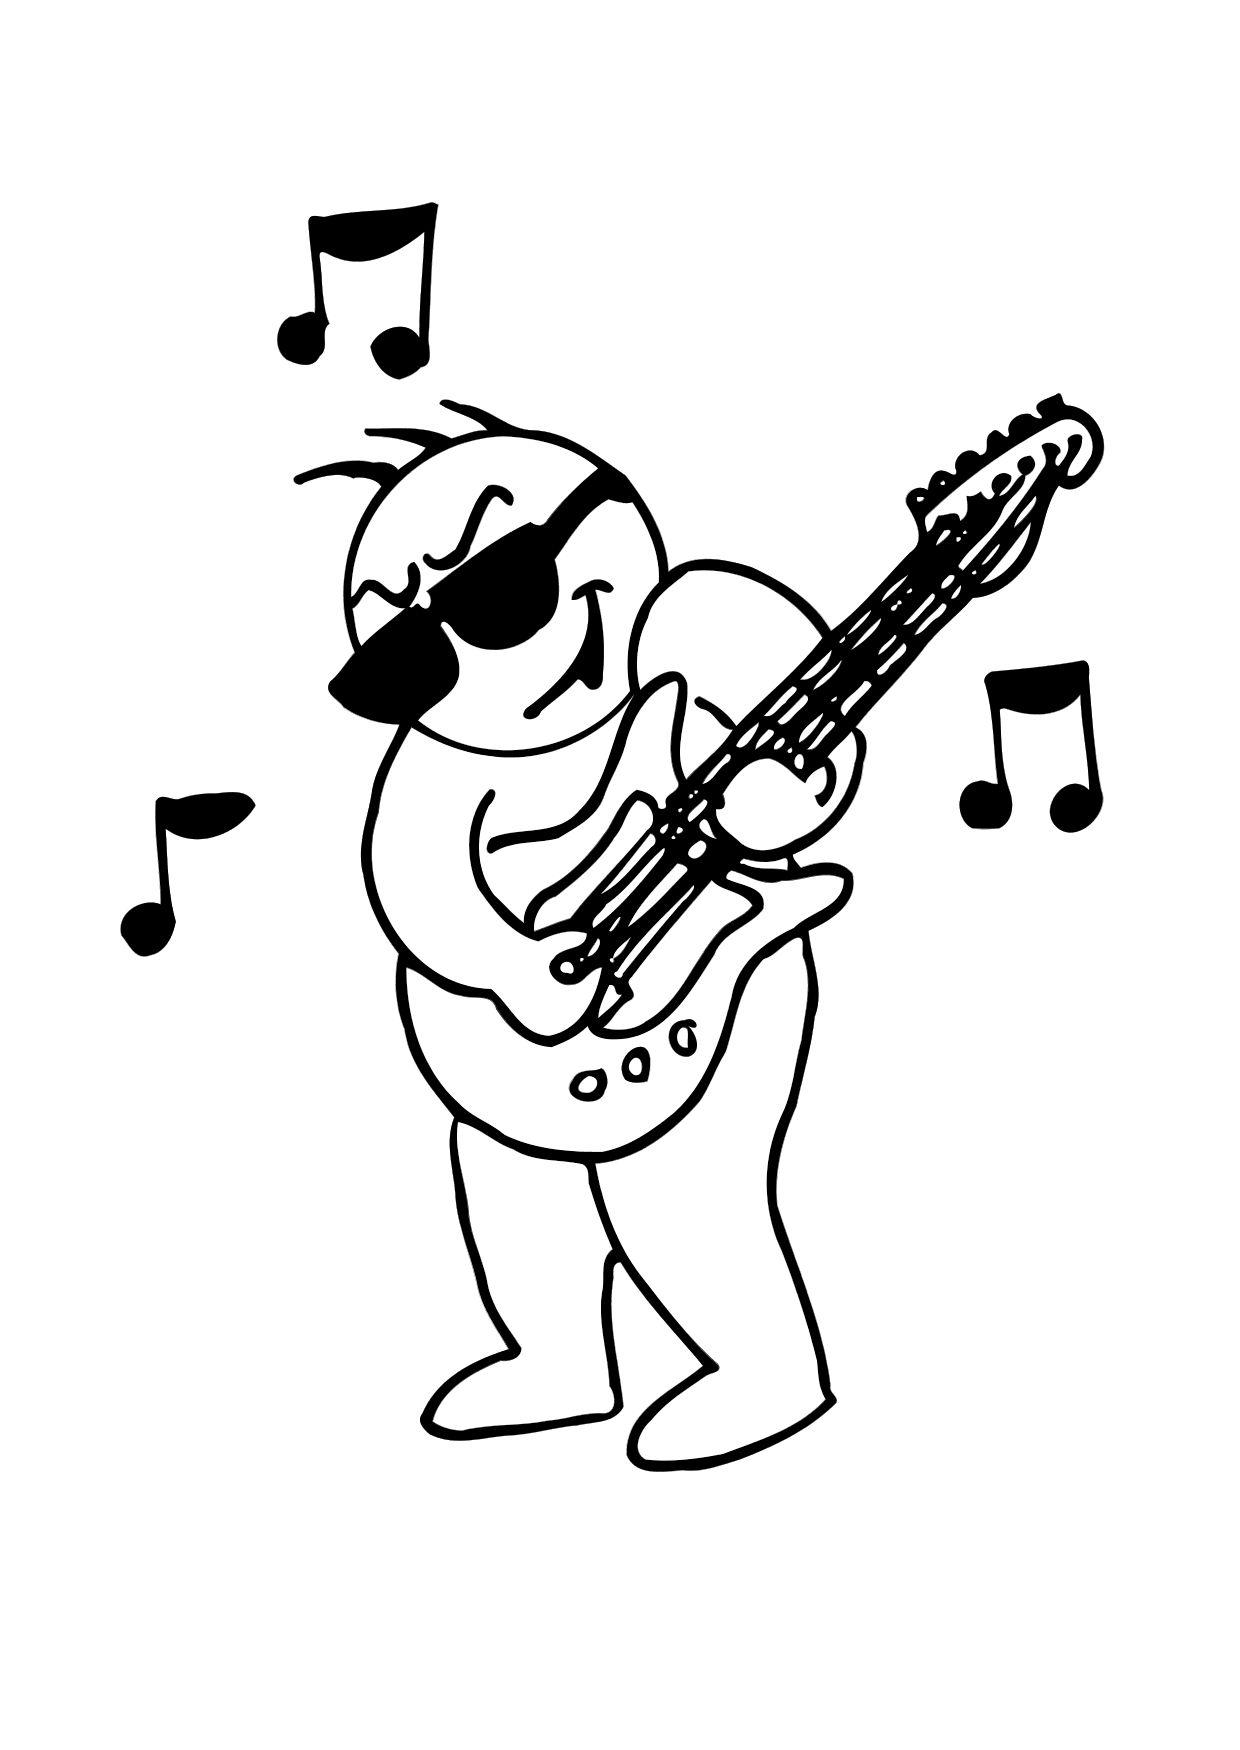 Coloring page playing guitar